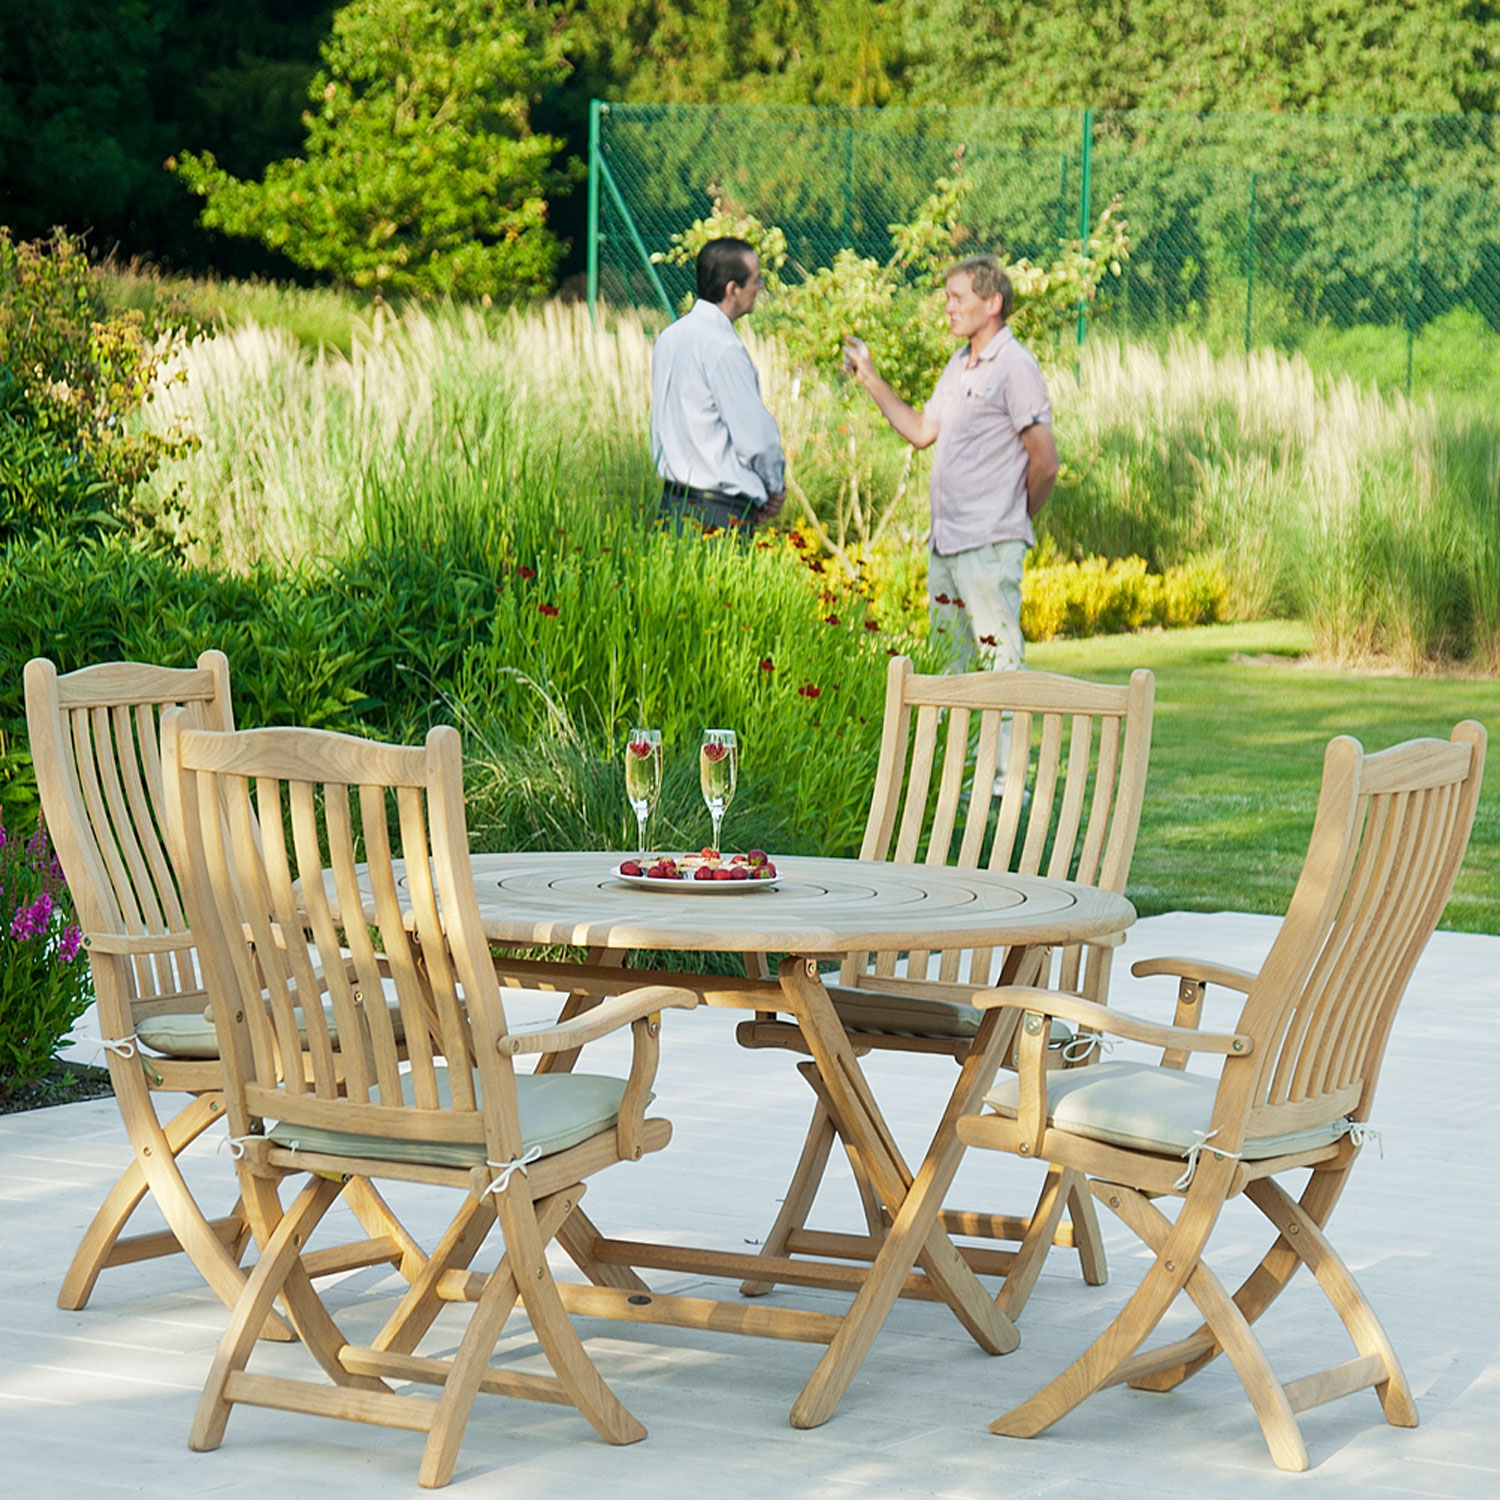 Roble 4 Seat Bengal Folding Round, Round Wooden Folding Garden Table And Chairs